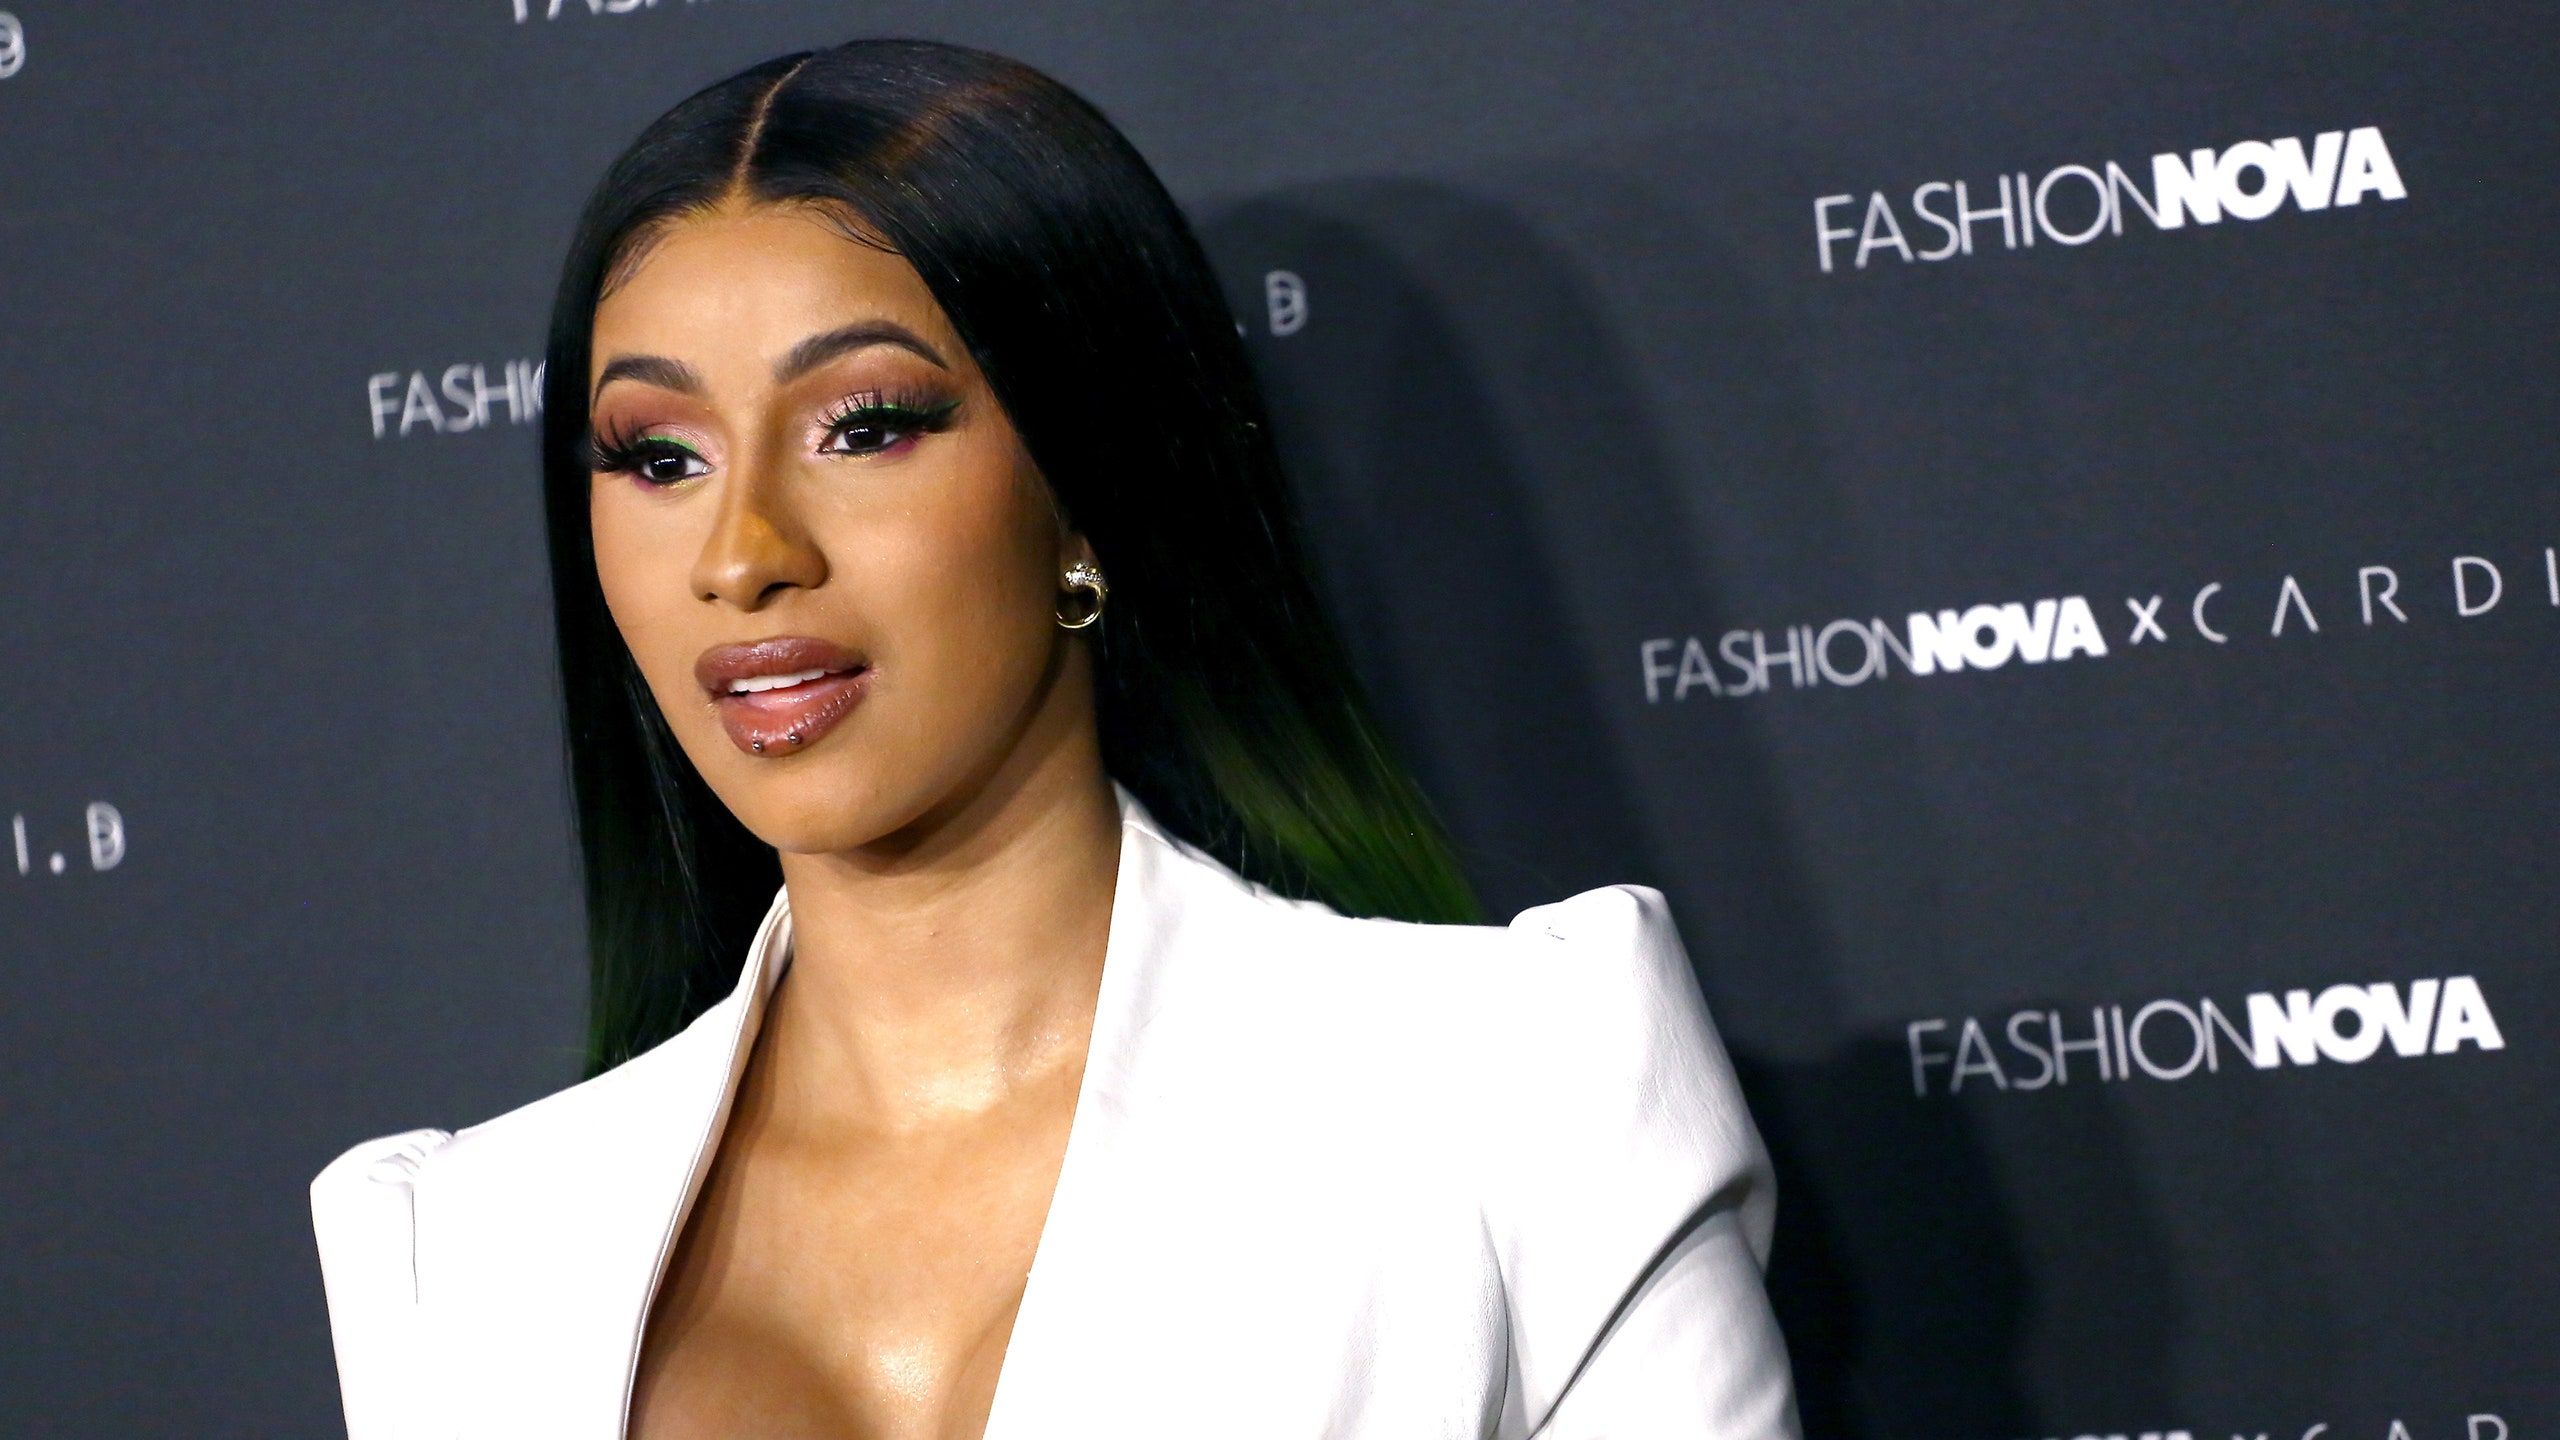 Cardi B Says Her Makeup Line May Come “Very” Soon